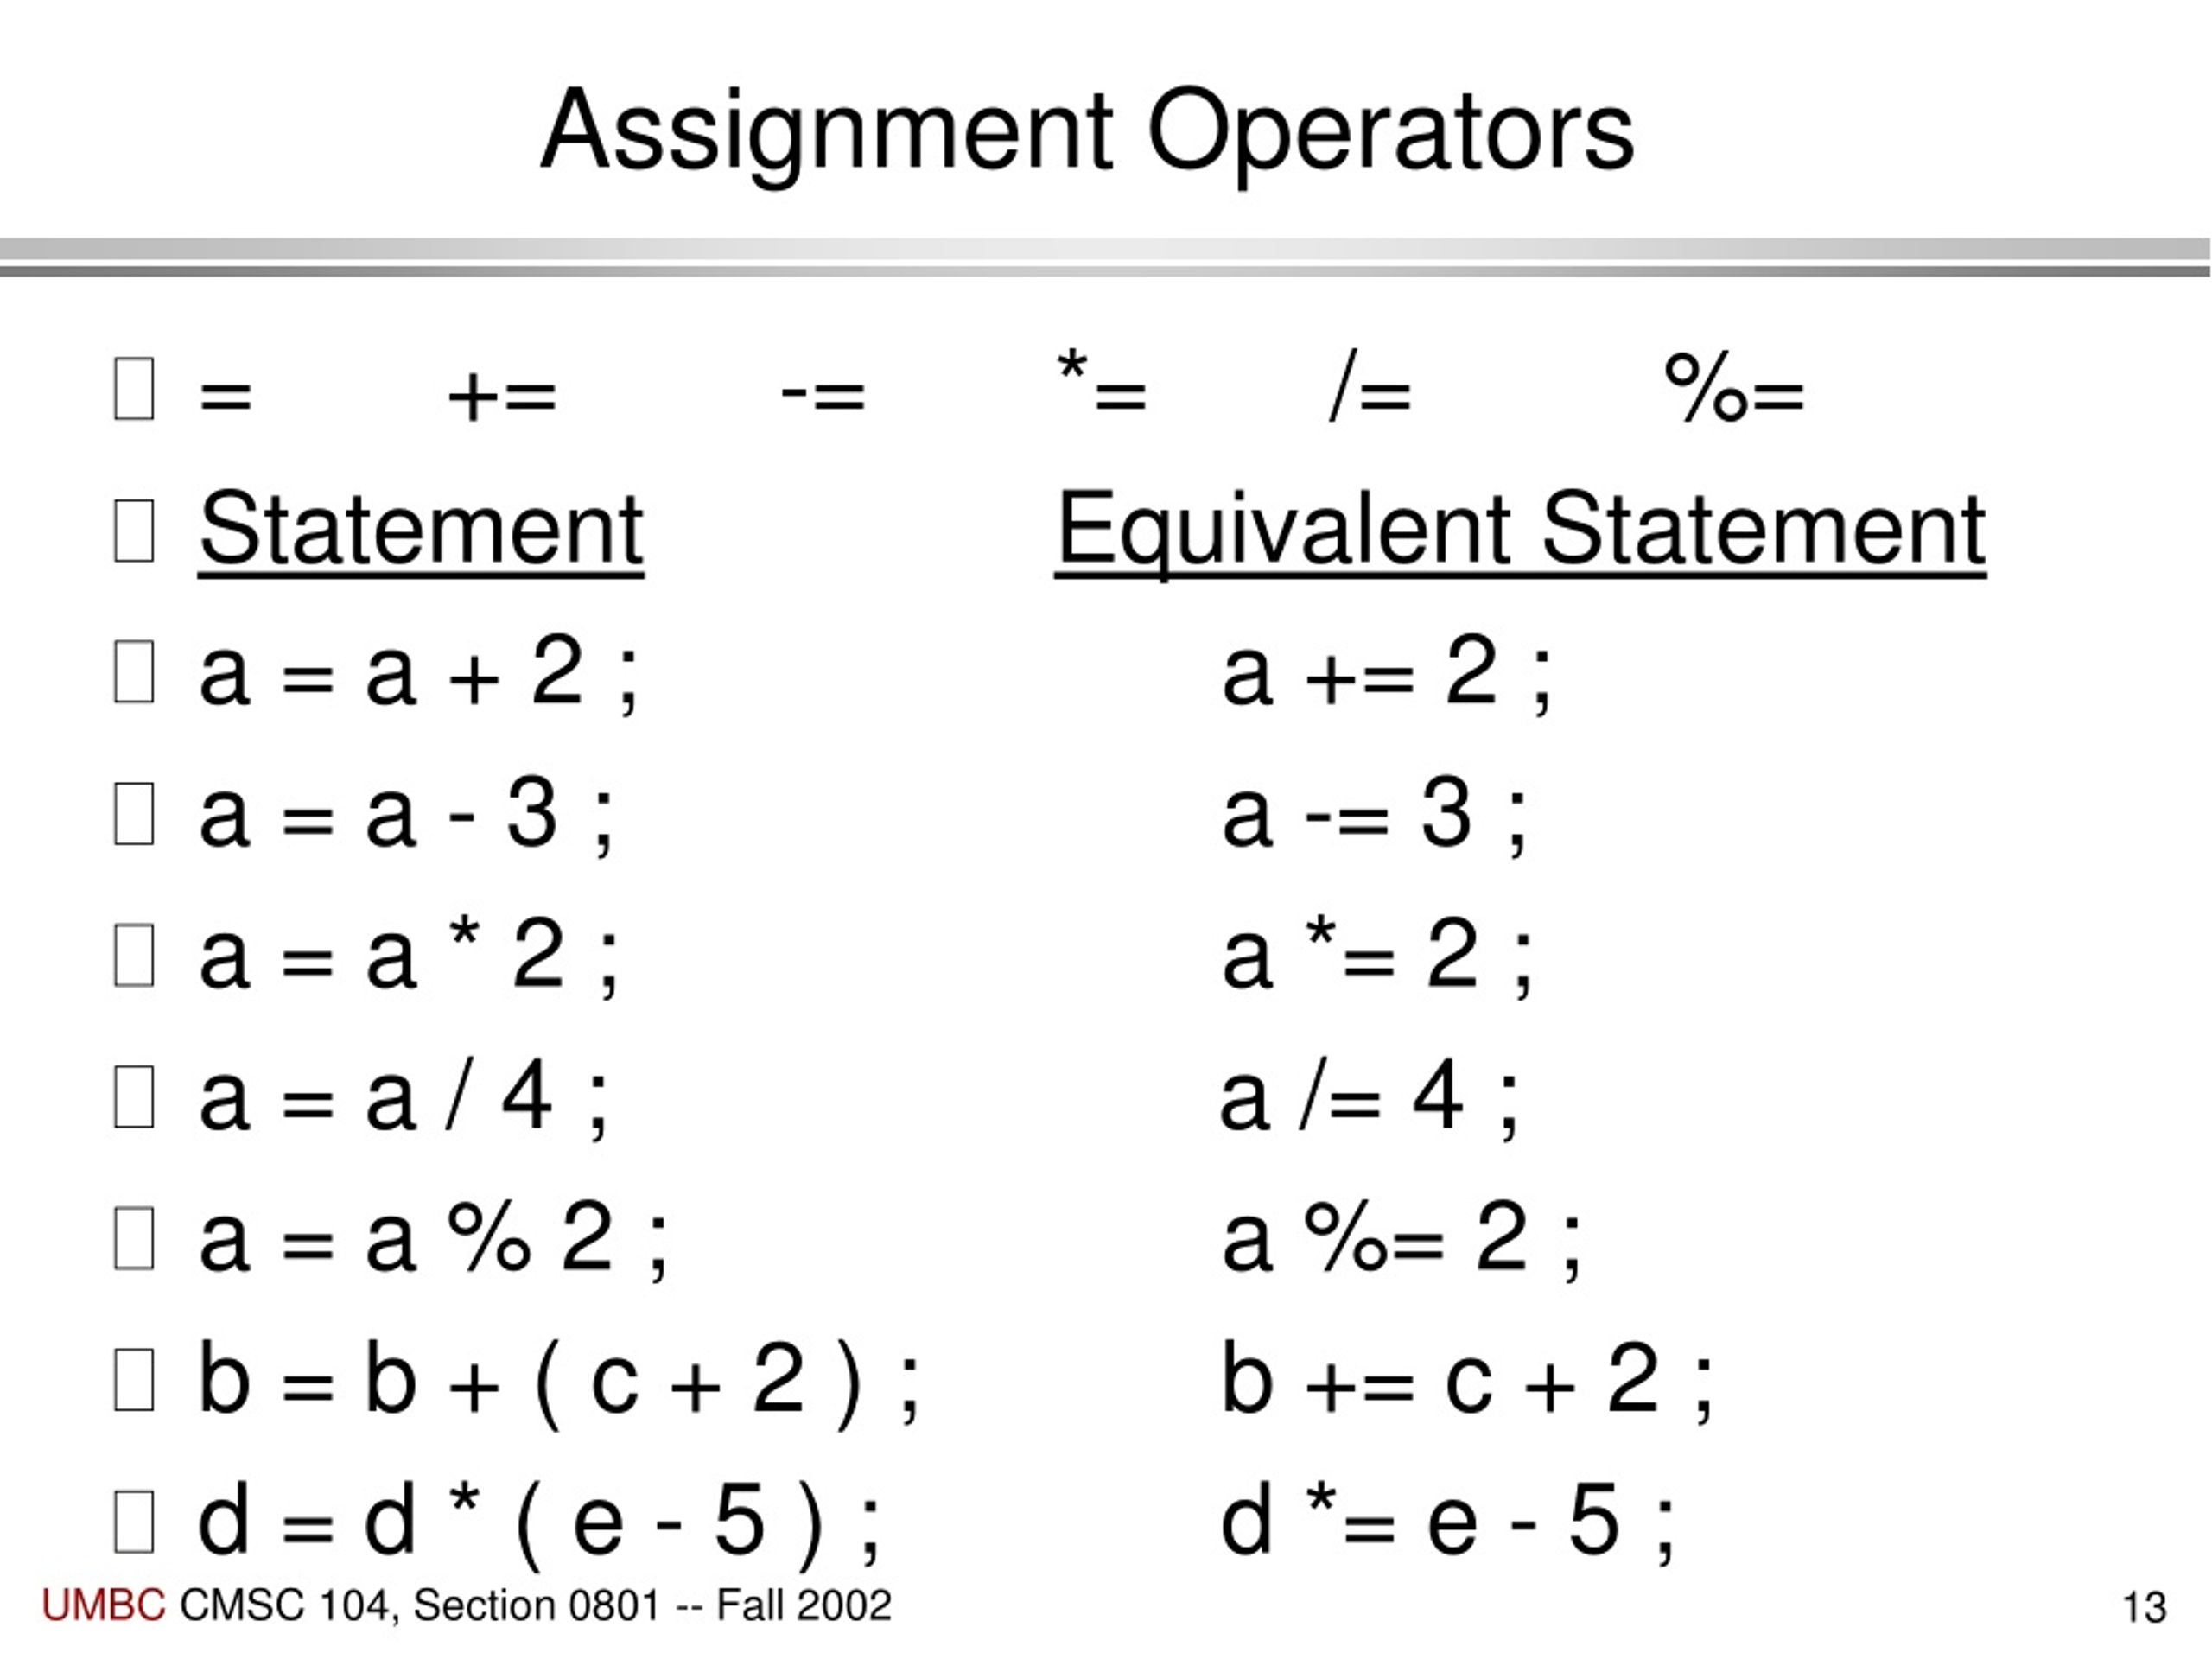 outline different assignment operators with examples